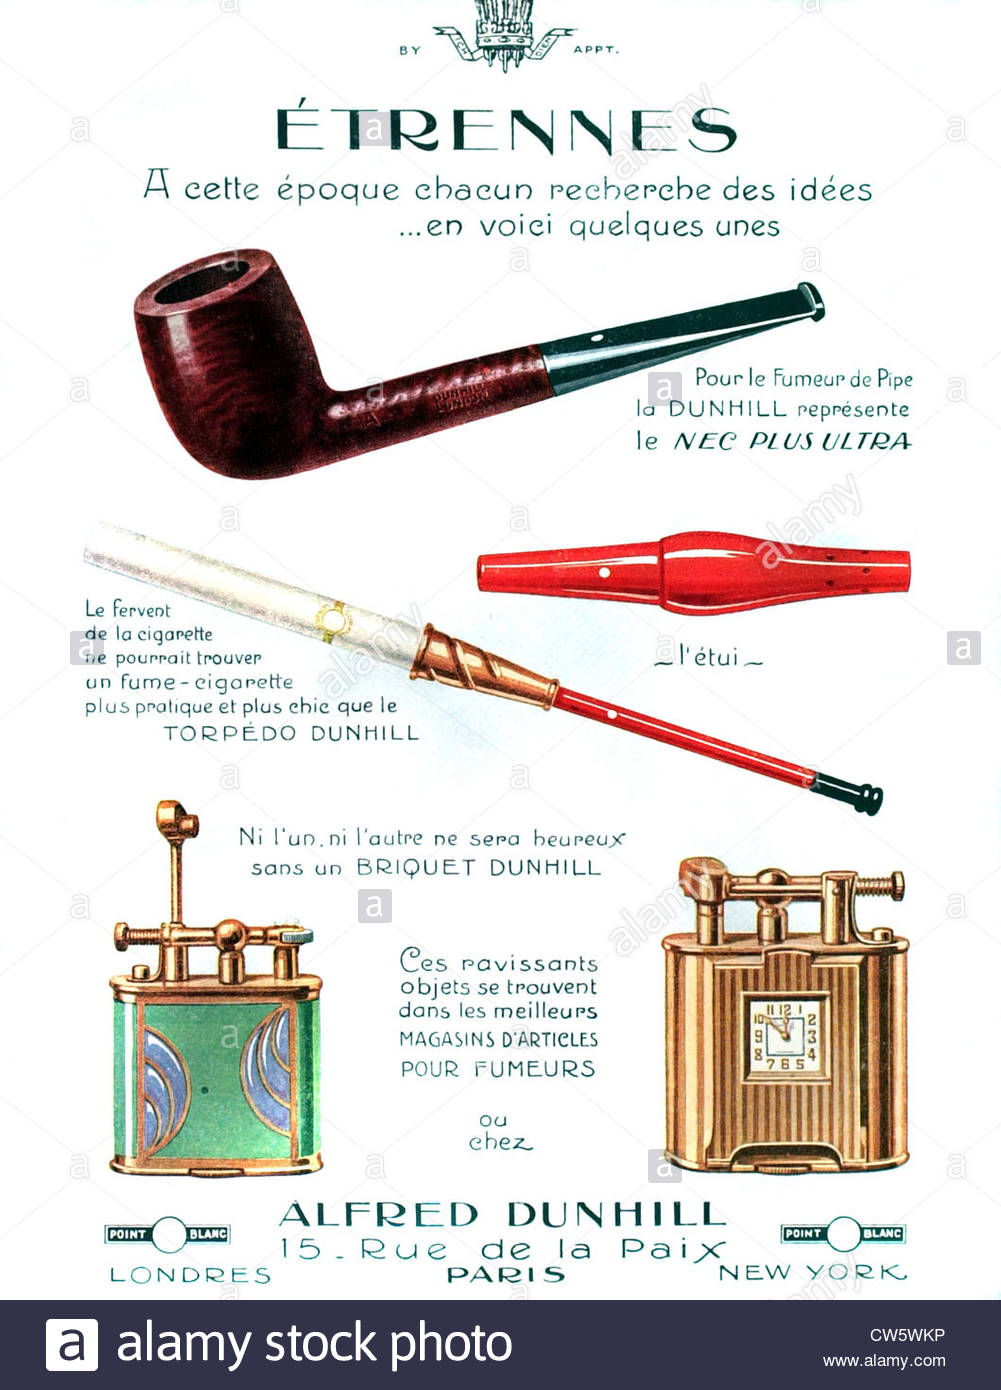 Parlons des pipes Dunhill... (1) - Page 88 Advert13